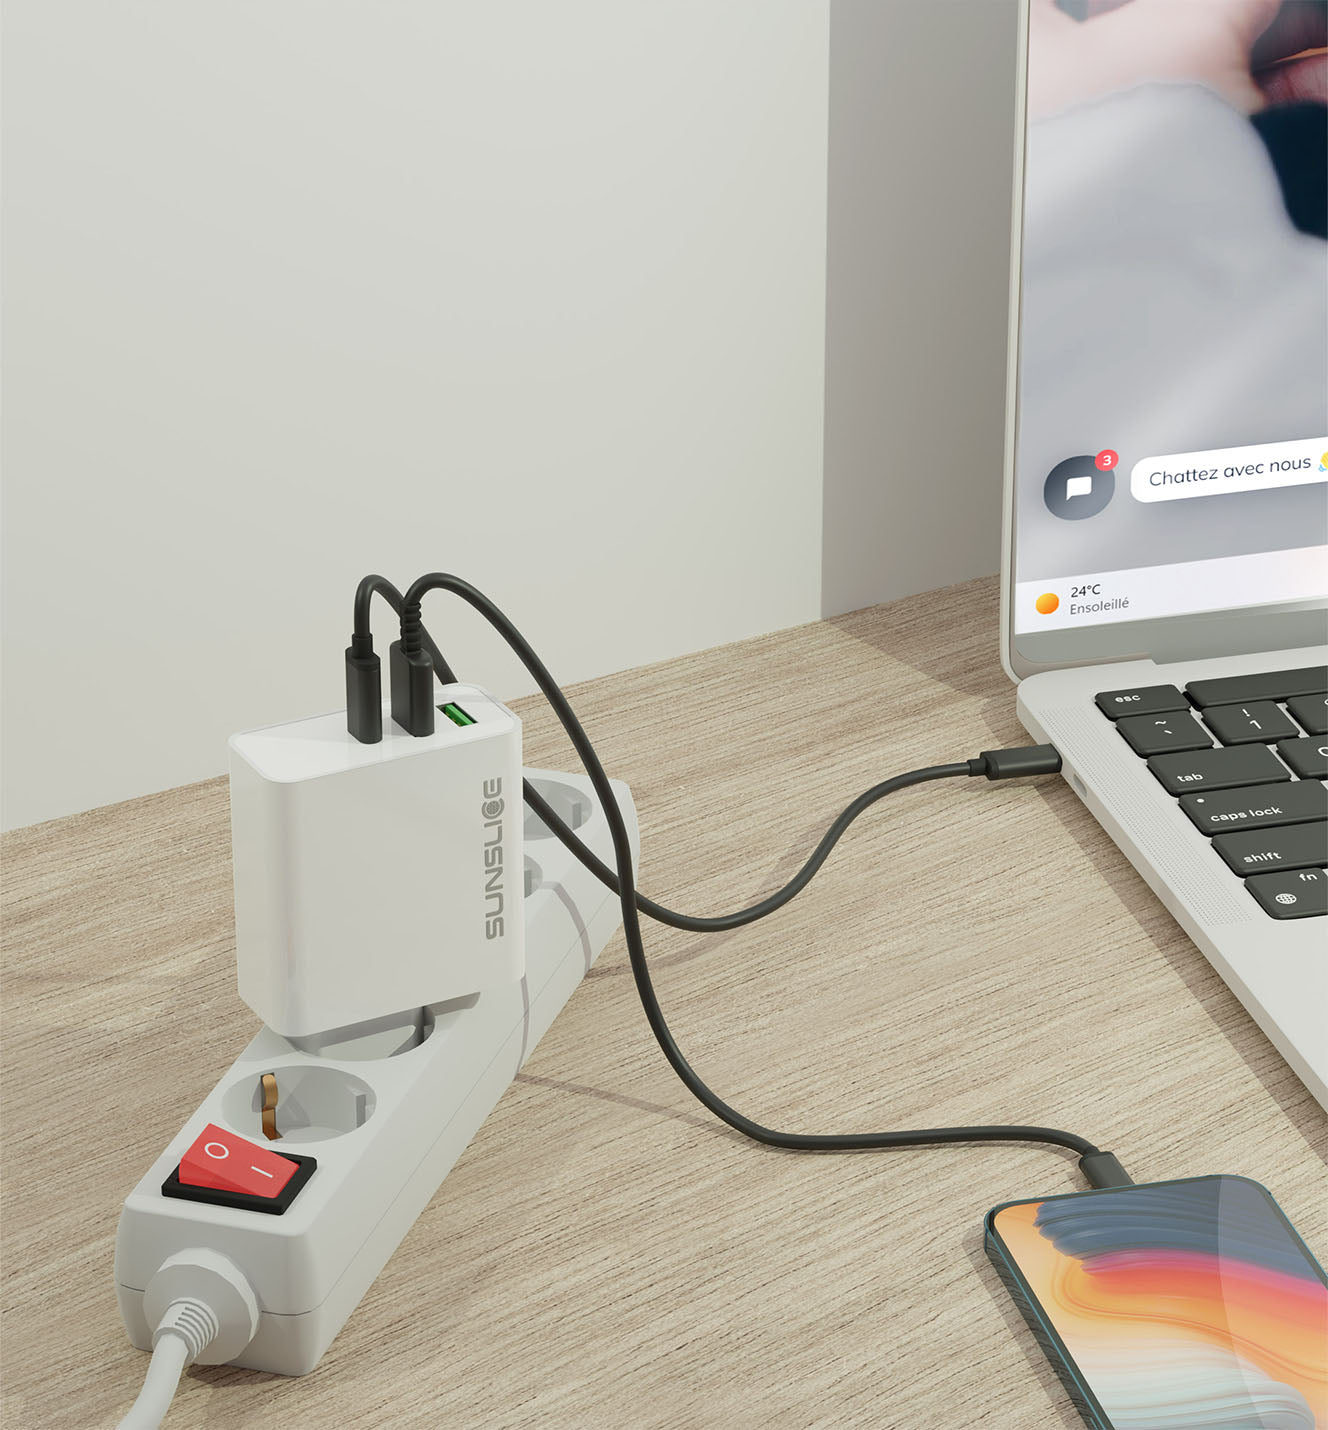 Emperion 65 Watts - USB-C Laptop Charger and Power Bank fast Charger